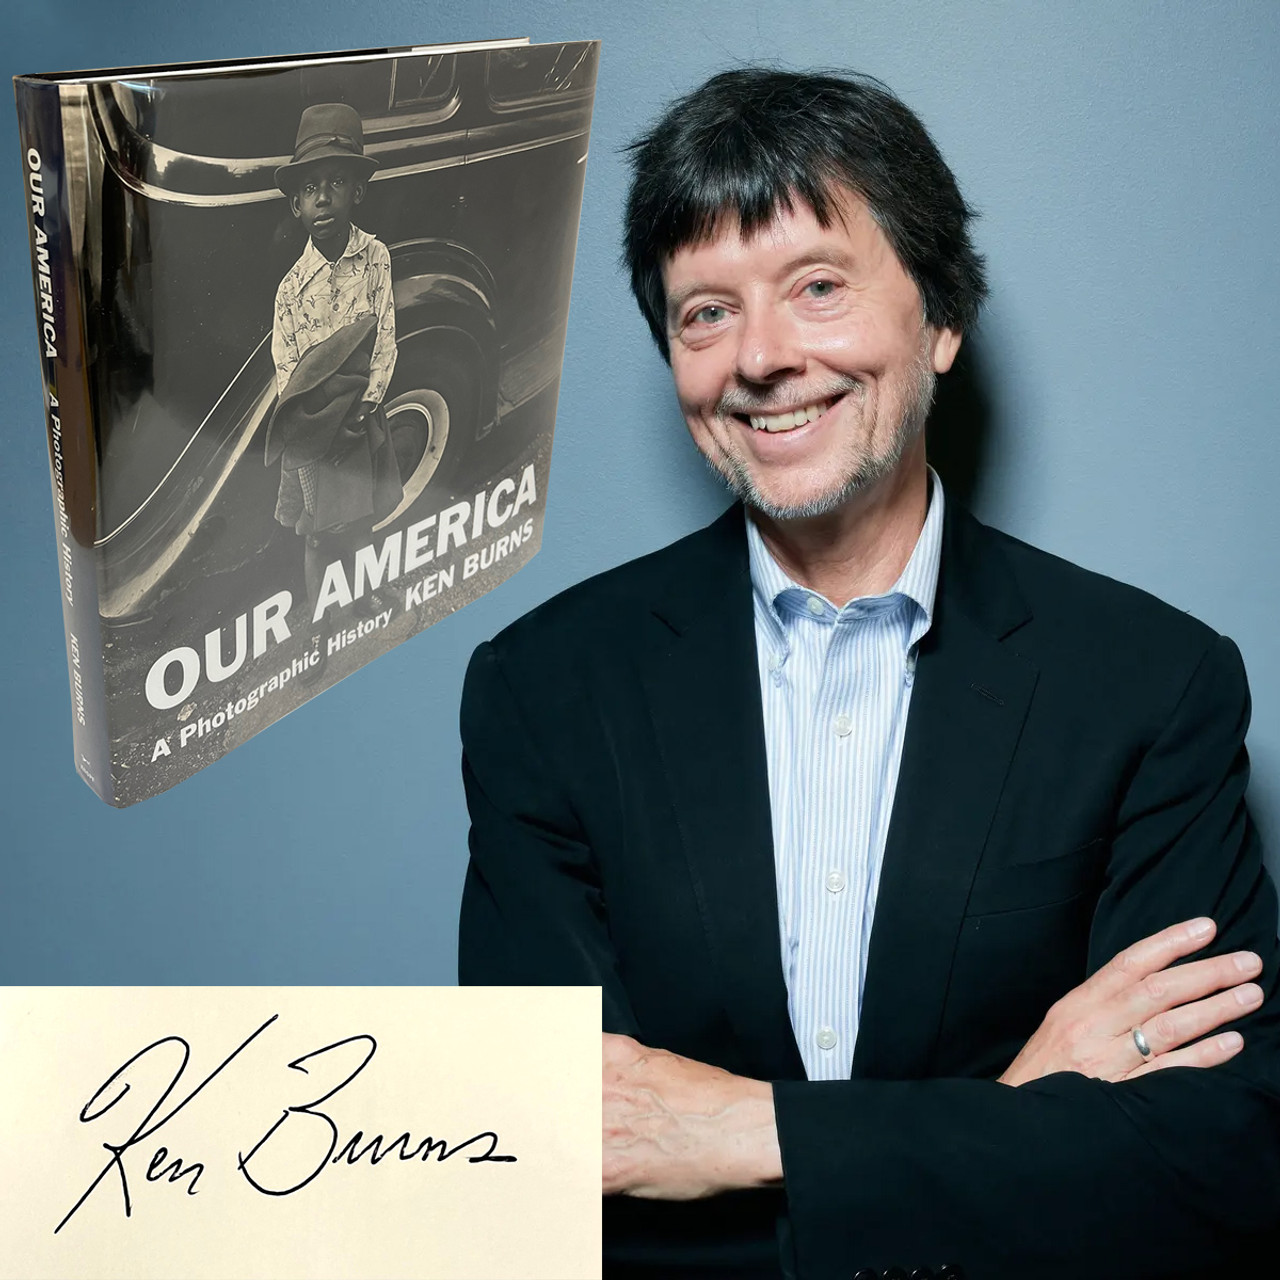 Ken Burns "Our America" Signed Collector's Edition, First Edition/Later Printing [Fine/Fine]